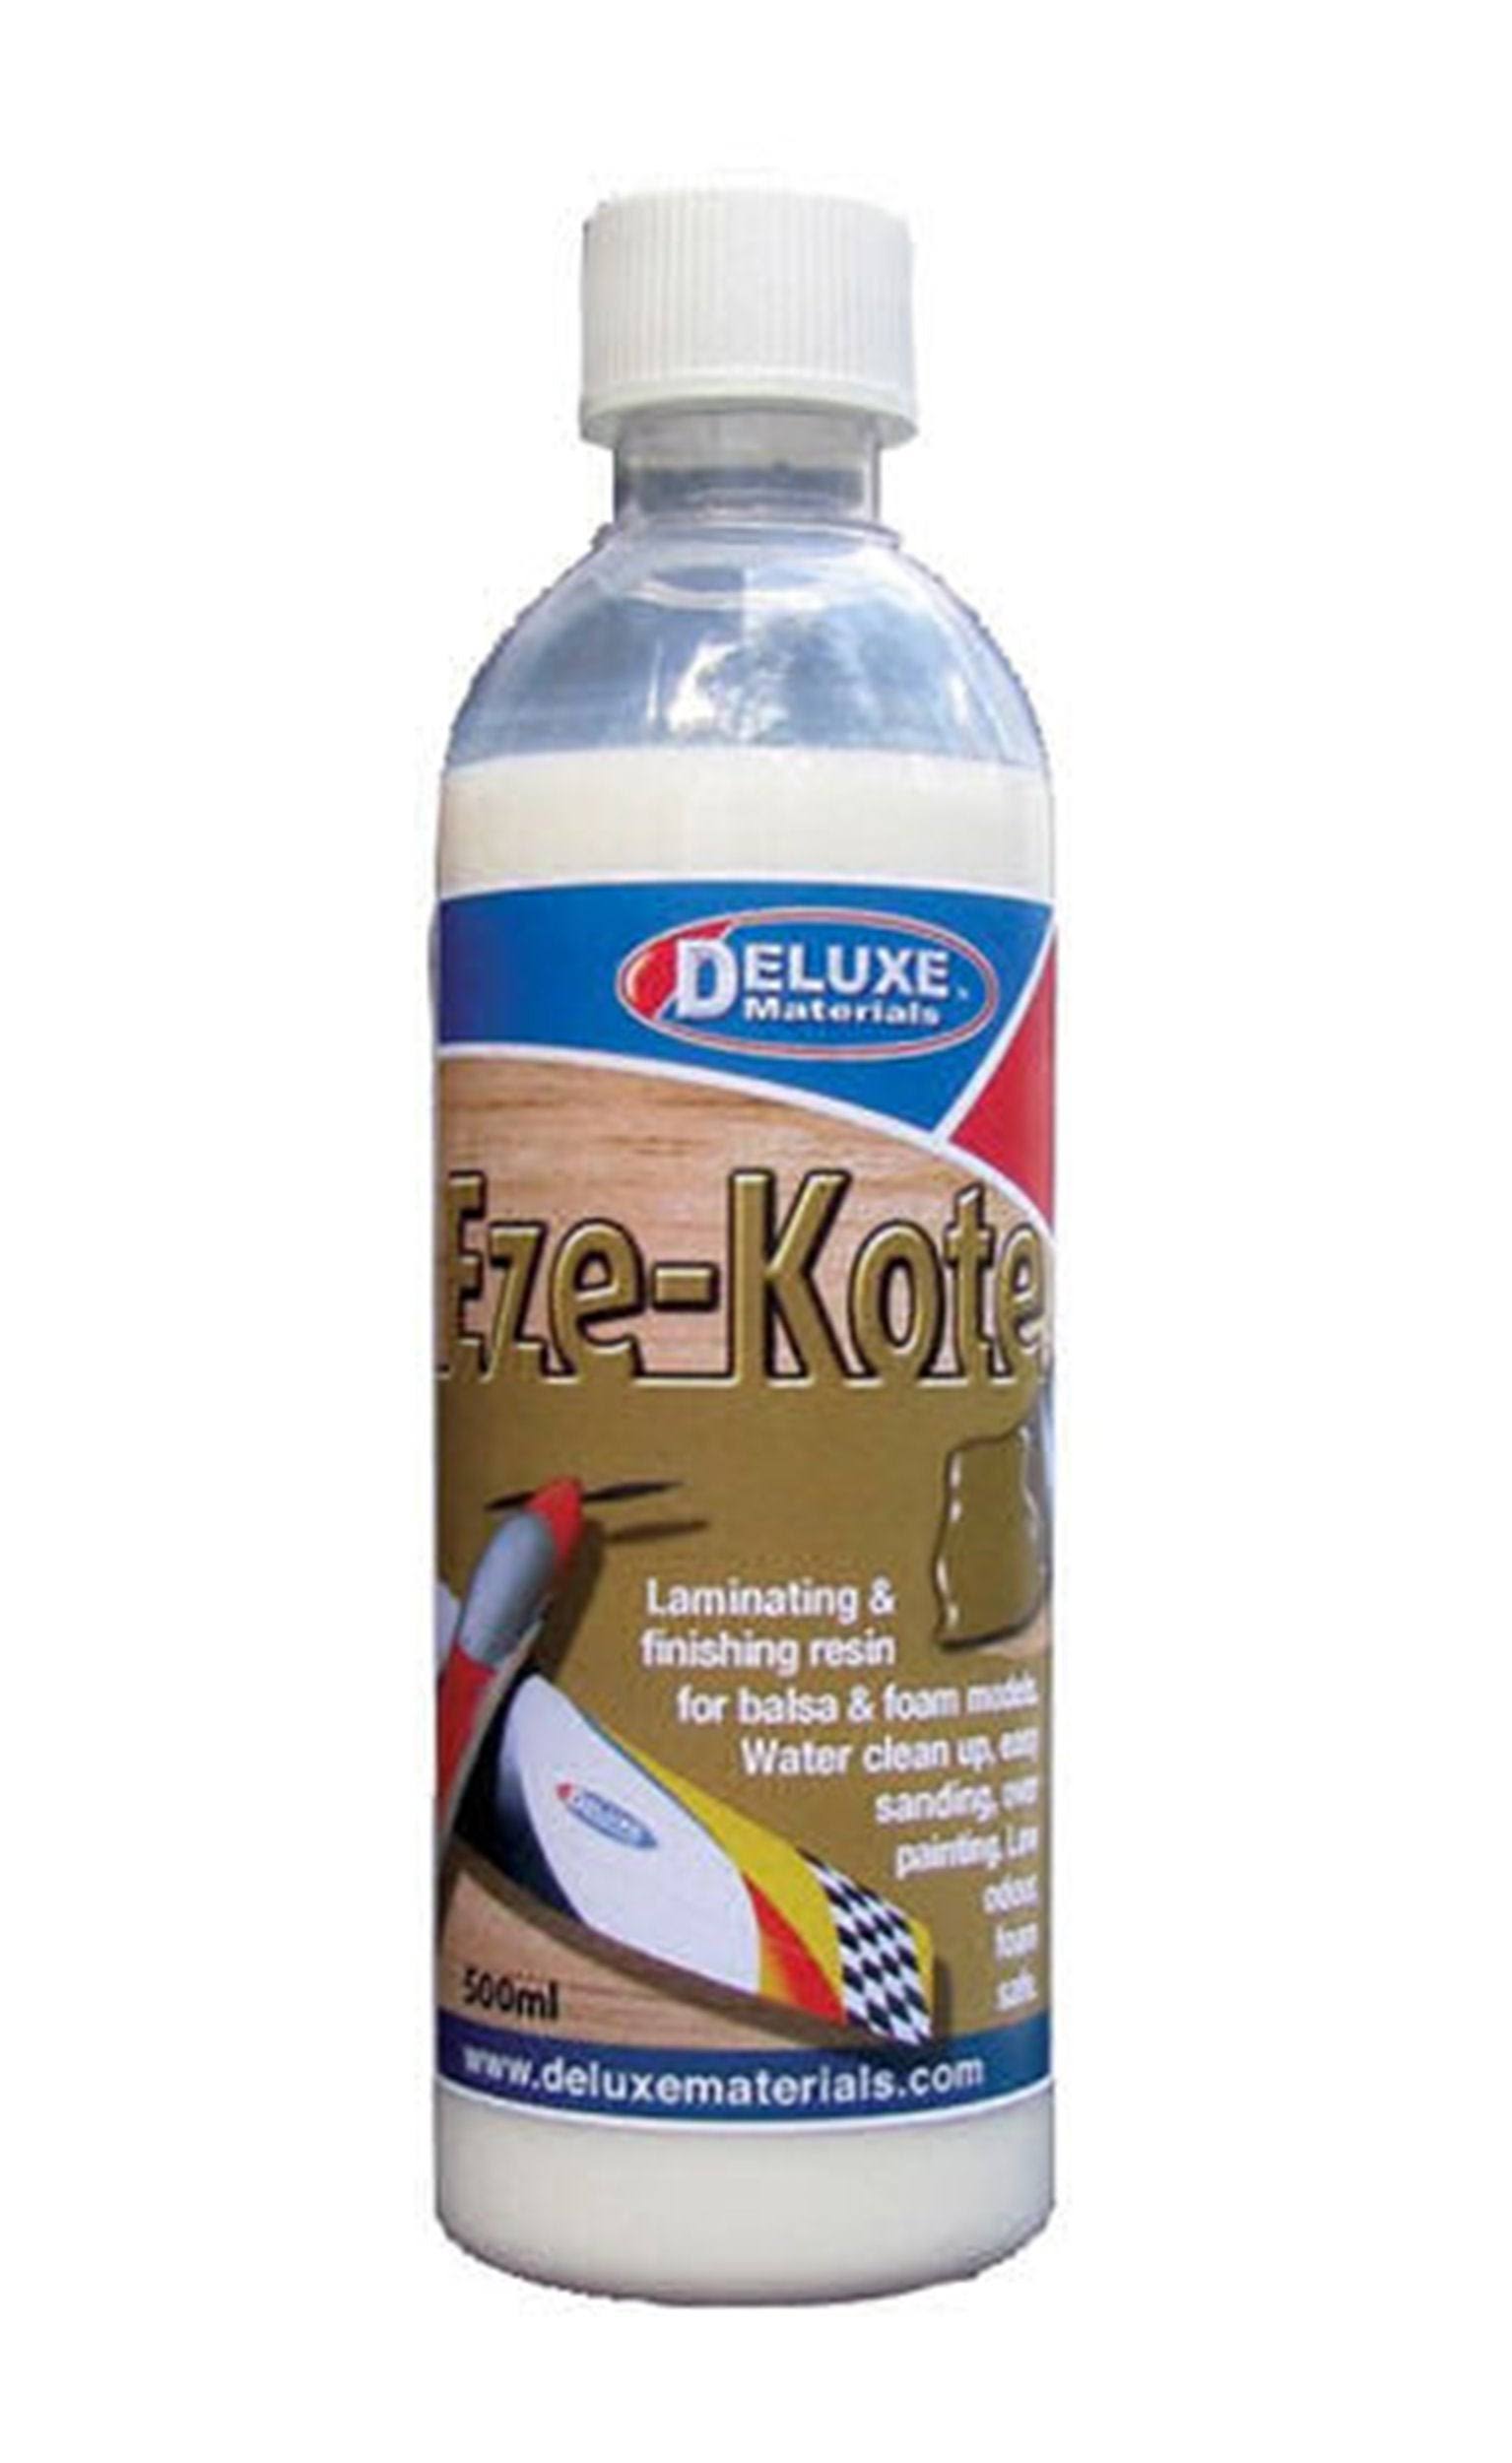 Deluxe Materials DLMBD37 Eze Kote Finishing Resin - 500ml